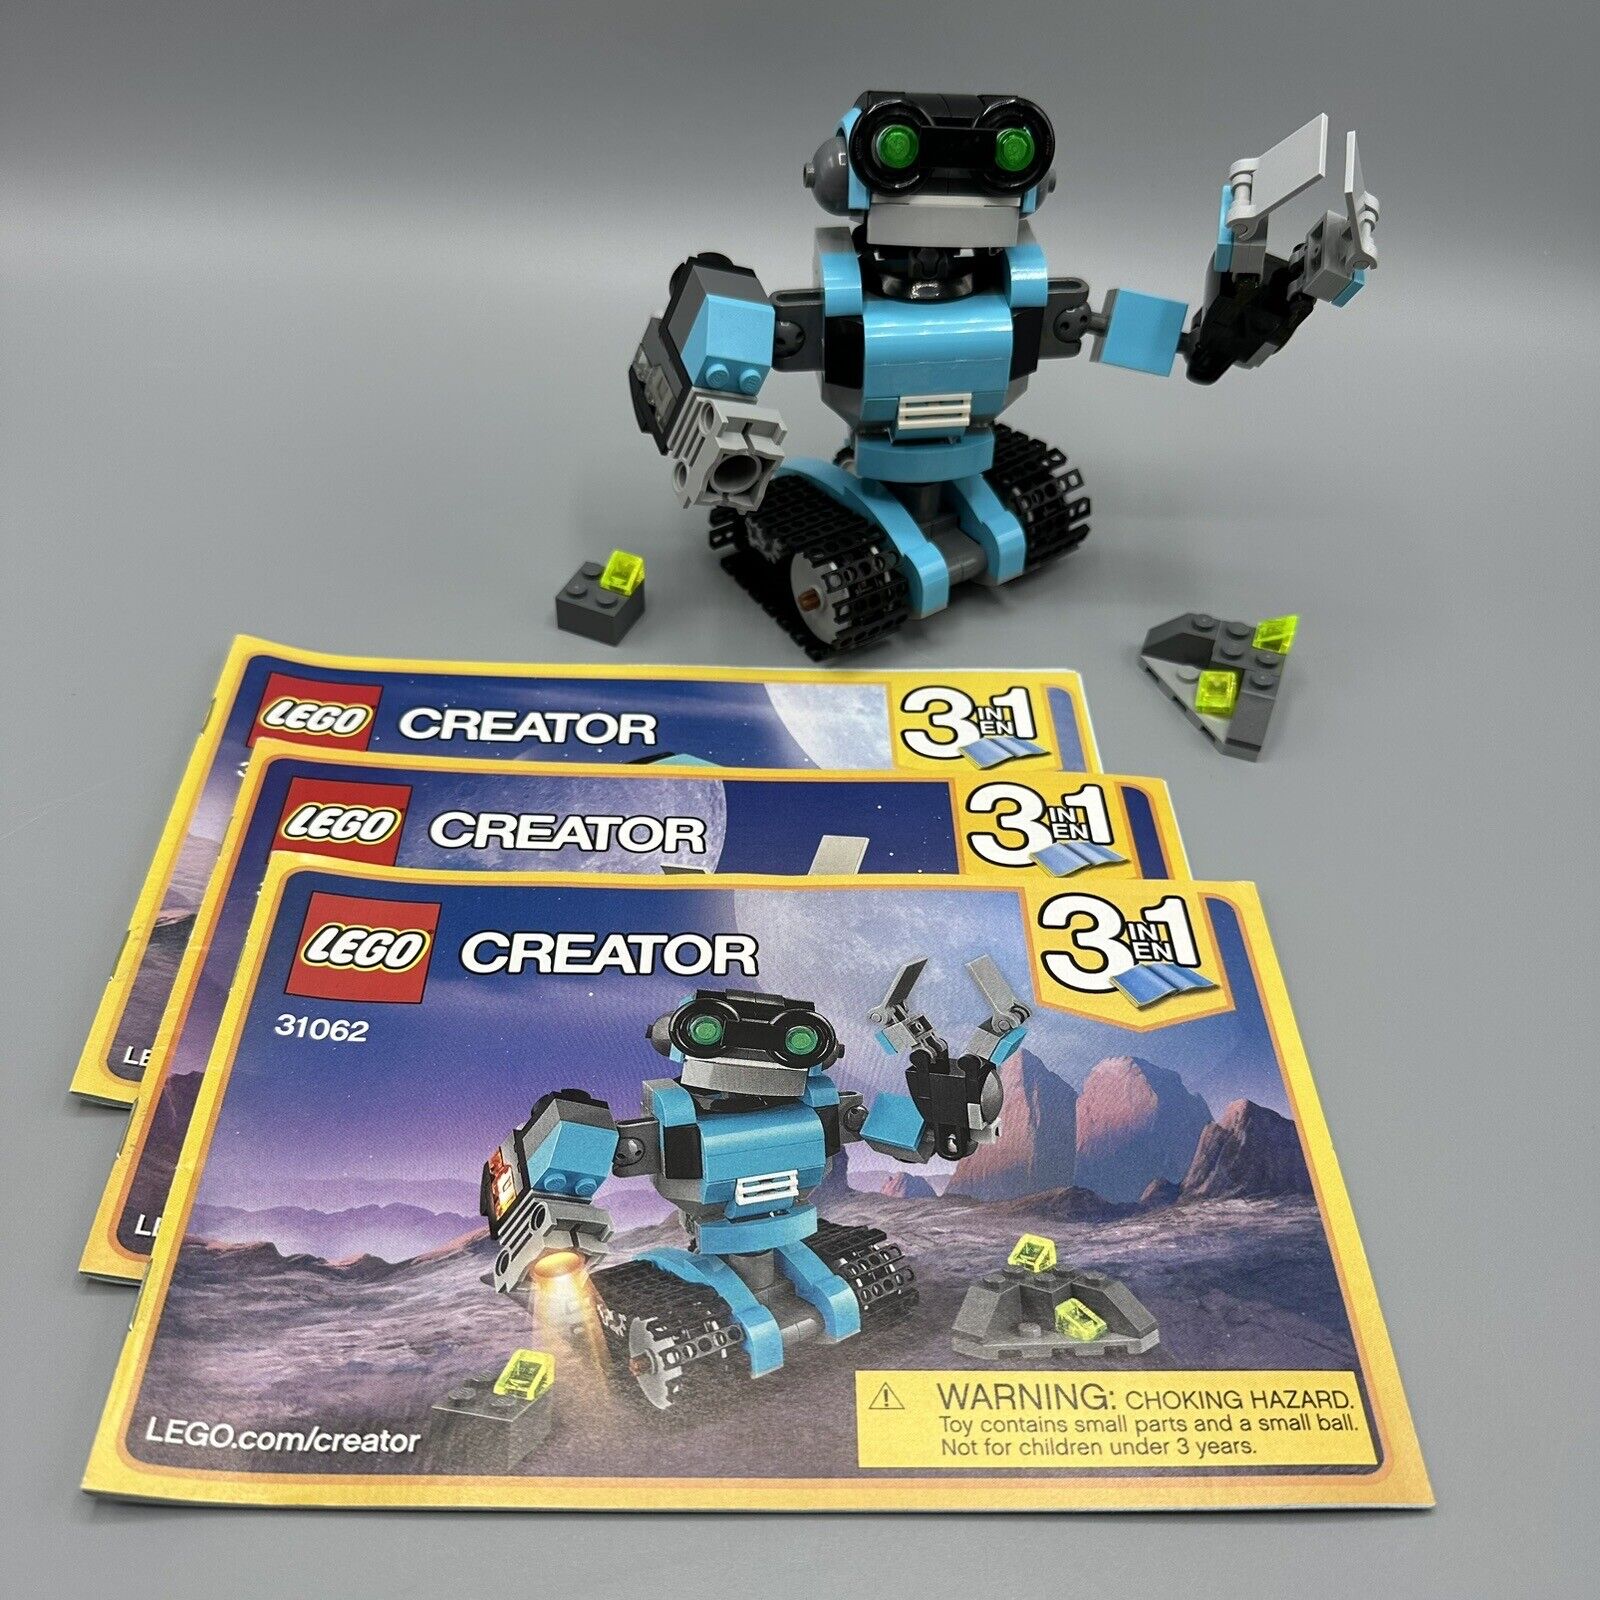 LEGO Creator 3-in-1 31062 Robo Explorer with Instructions 100% Complete No Box